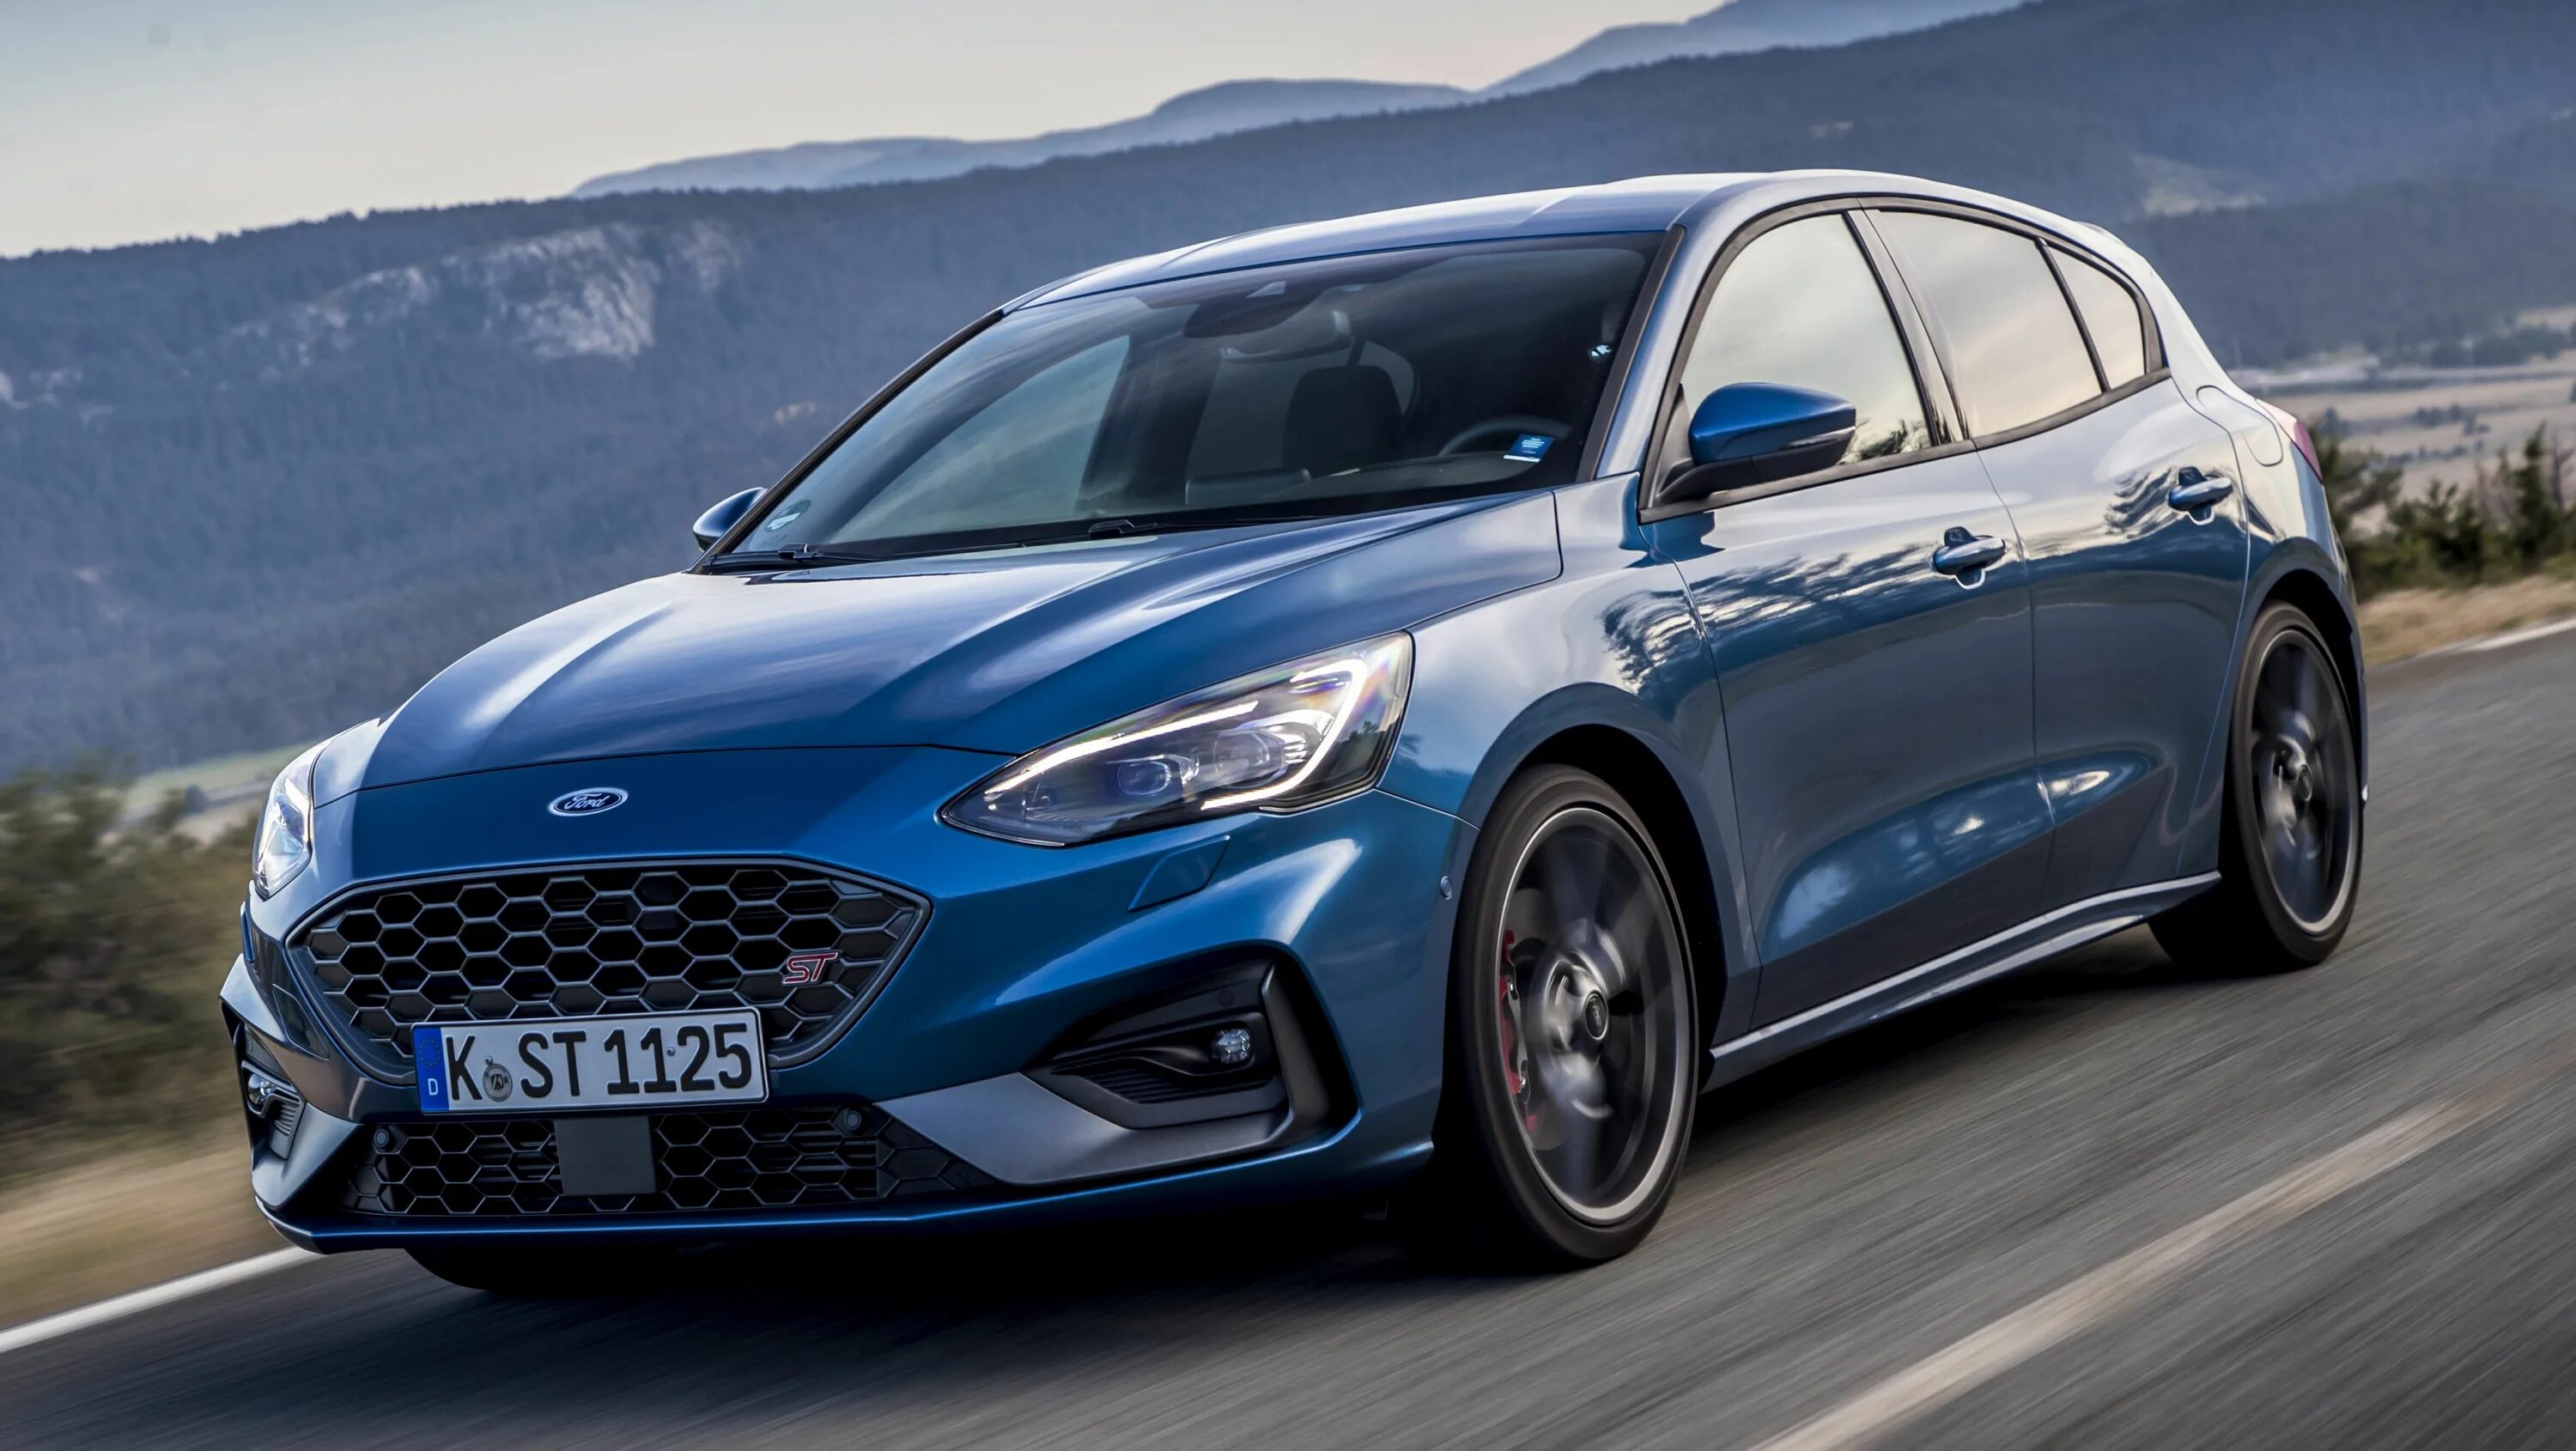 Ford Focus St 2019. Ford Focus 2020. Ford Focus Hatchback 2020. Ford Focus St 2021. Форд универсал 2019